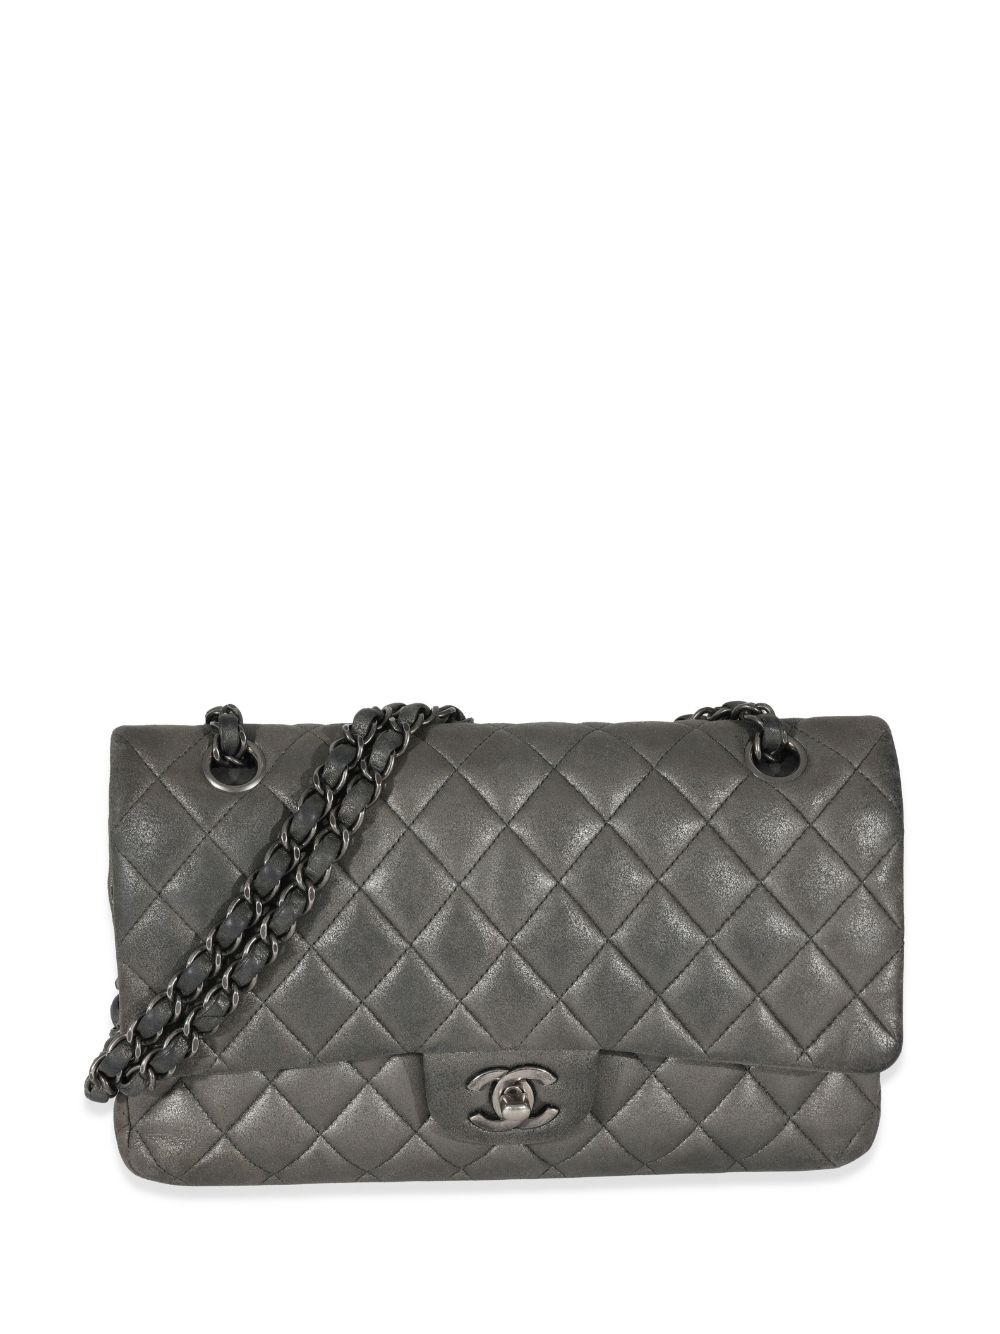 CHANEL Pre-Owned medium Double Flap shoulder bag - Grey von CHANEL Pre-Owned